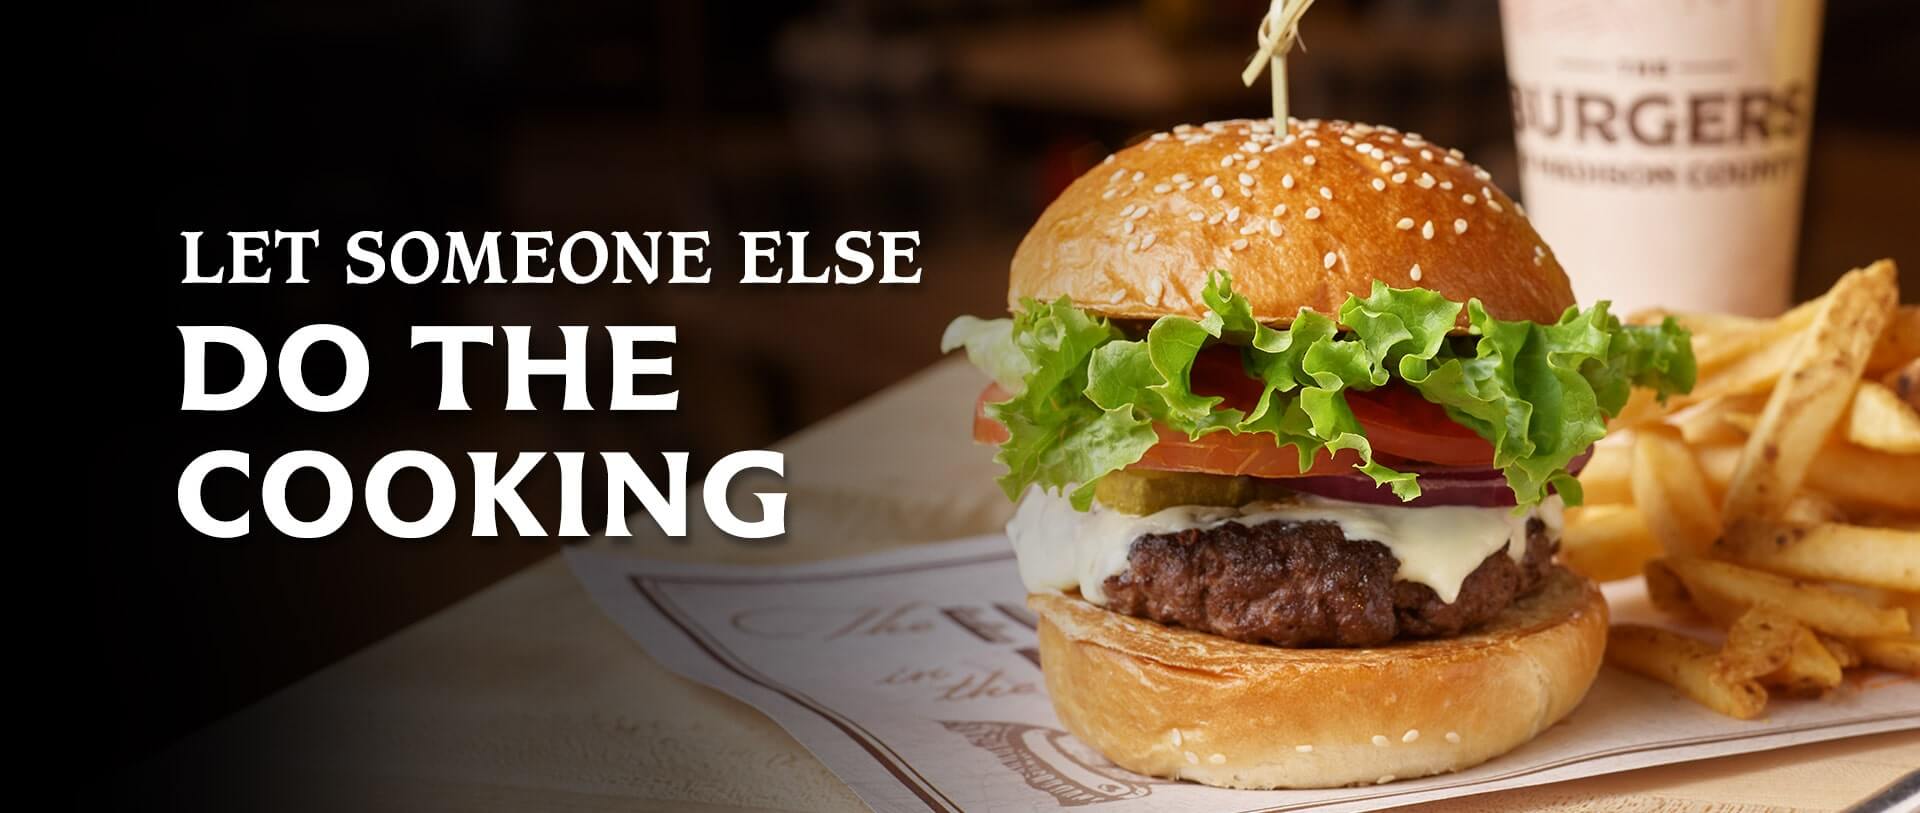 Let someone else do the cooking - delicious burger